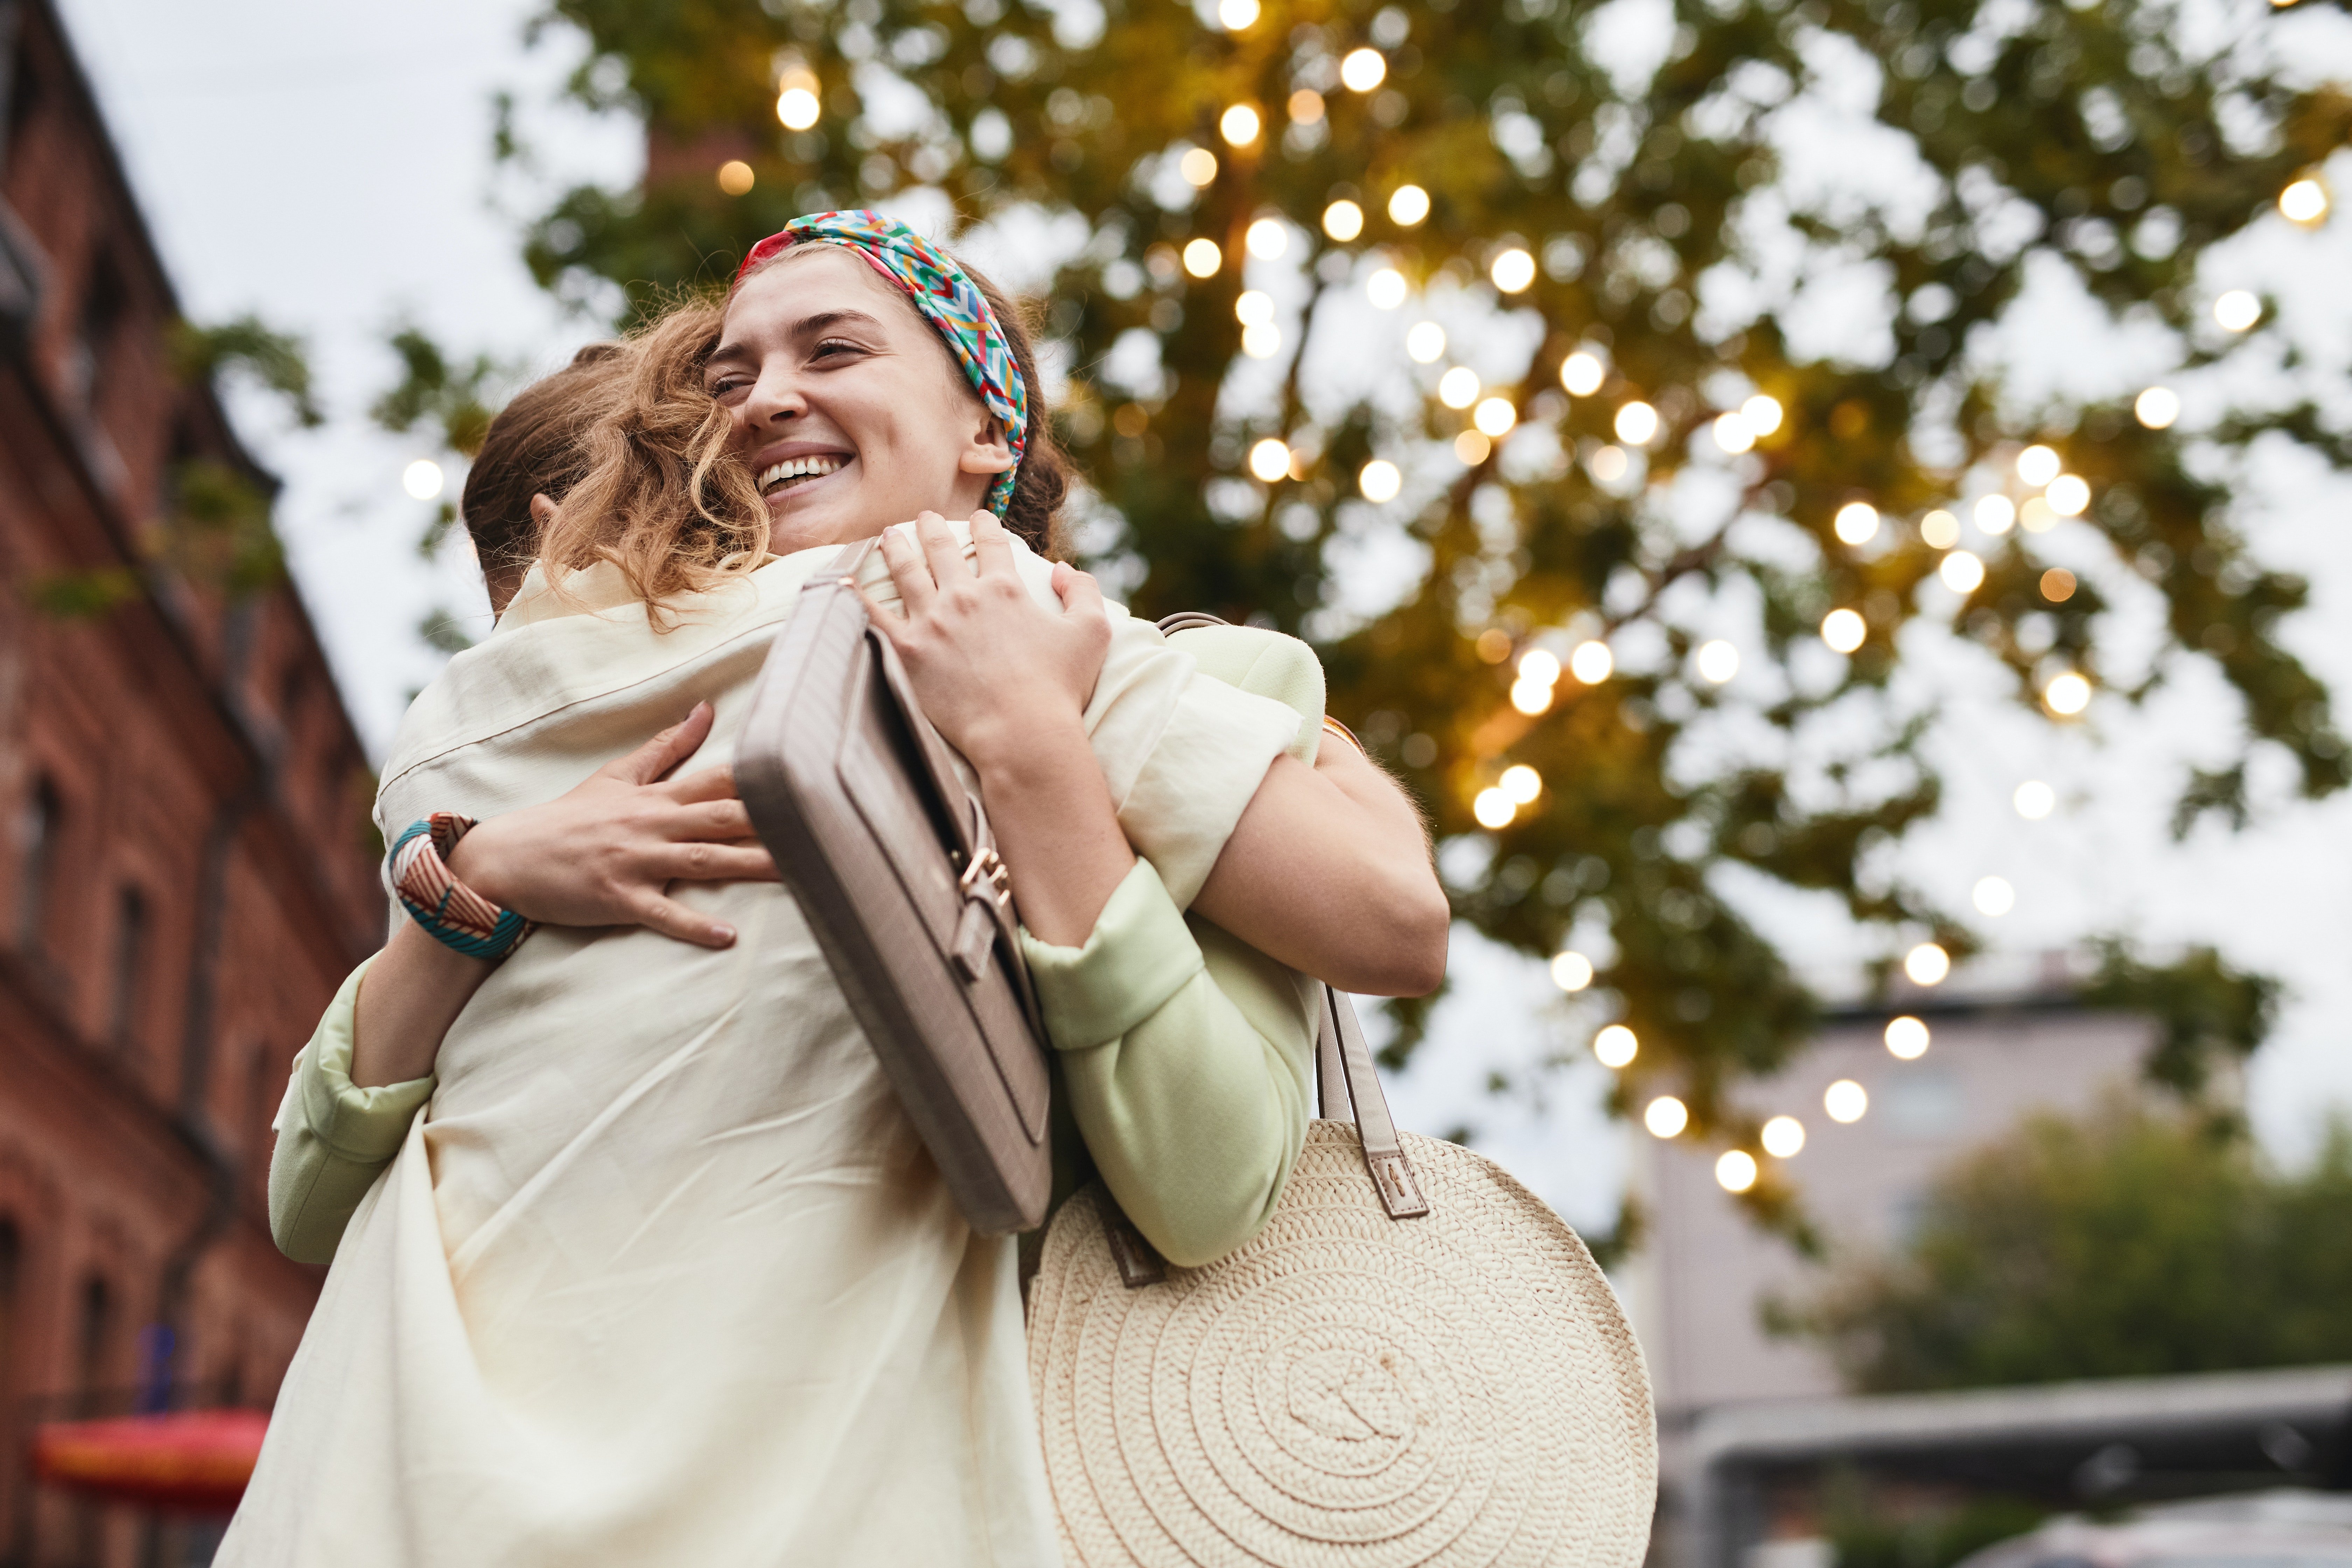 The daughter had no idea why her mother had an outburst of affection for her & Eddie after returning home. | Source: Pexels